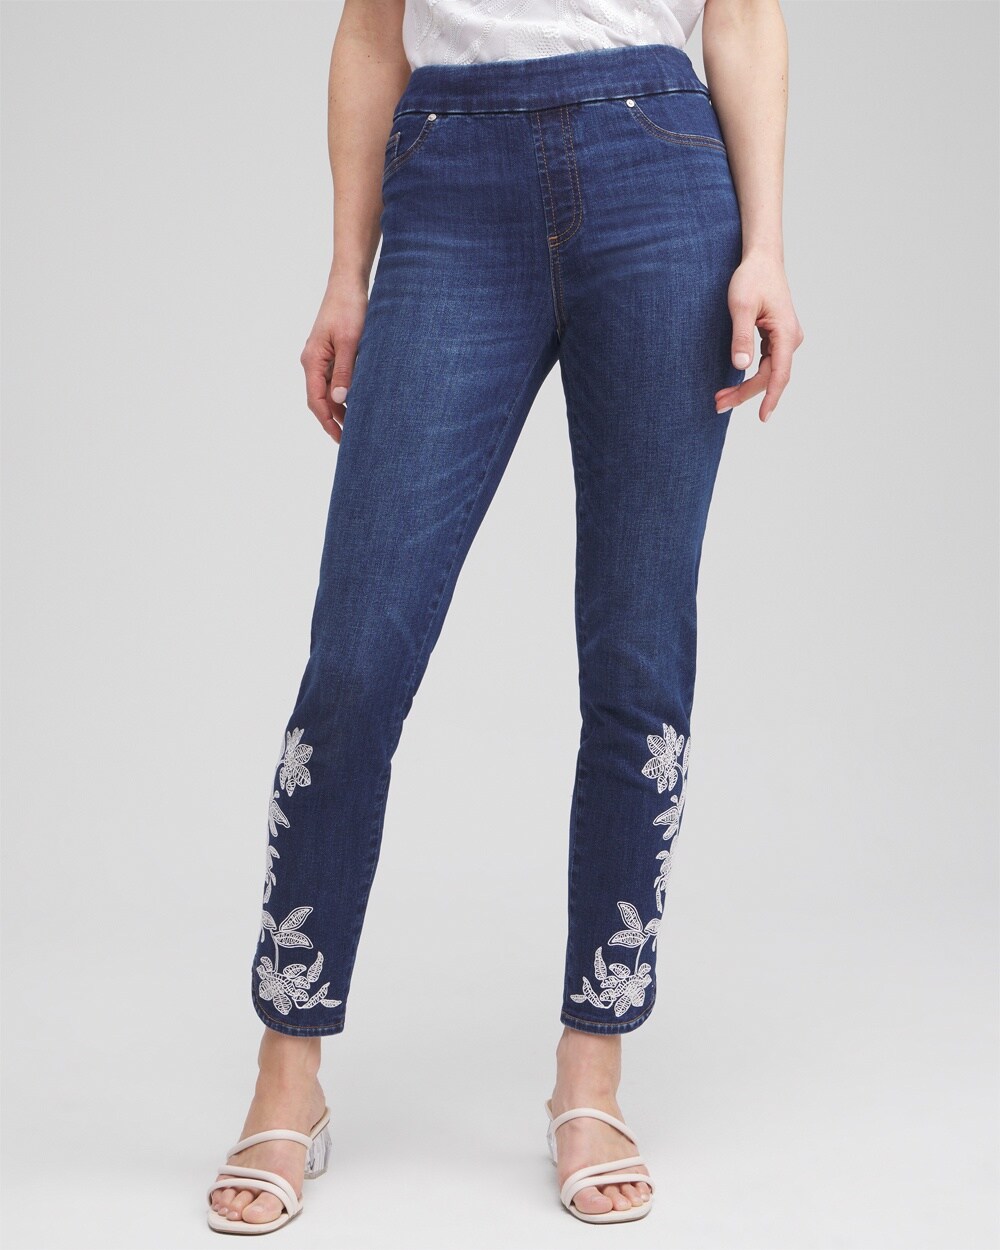 Chico's Embroidered Pull-on Ankle Jeggings In Medium Wash Denim Size 14p Petite |  In Morwenna Indigo